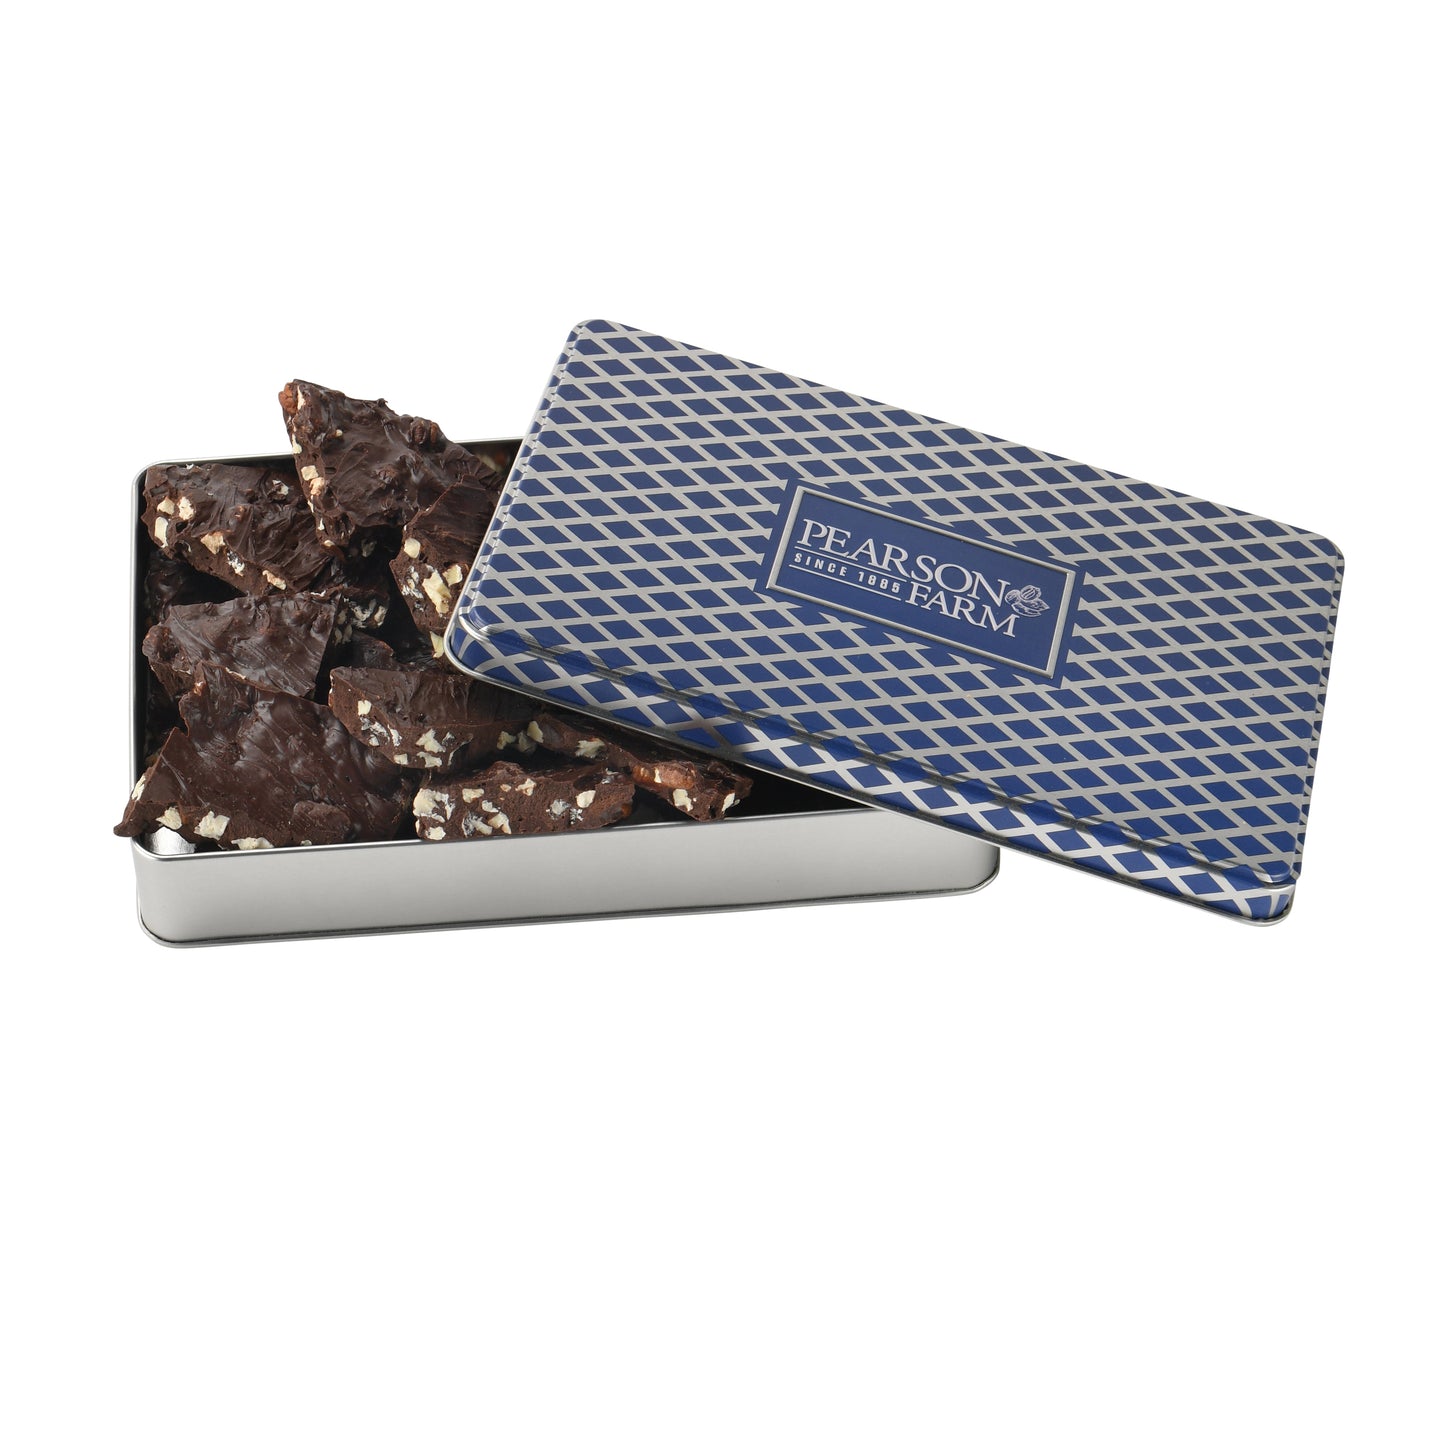 Our dark chocolate pecan bark is sure to delight